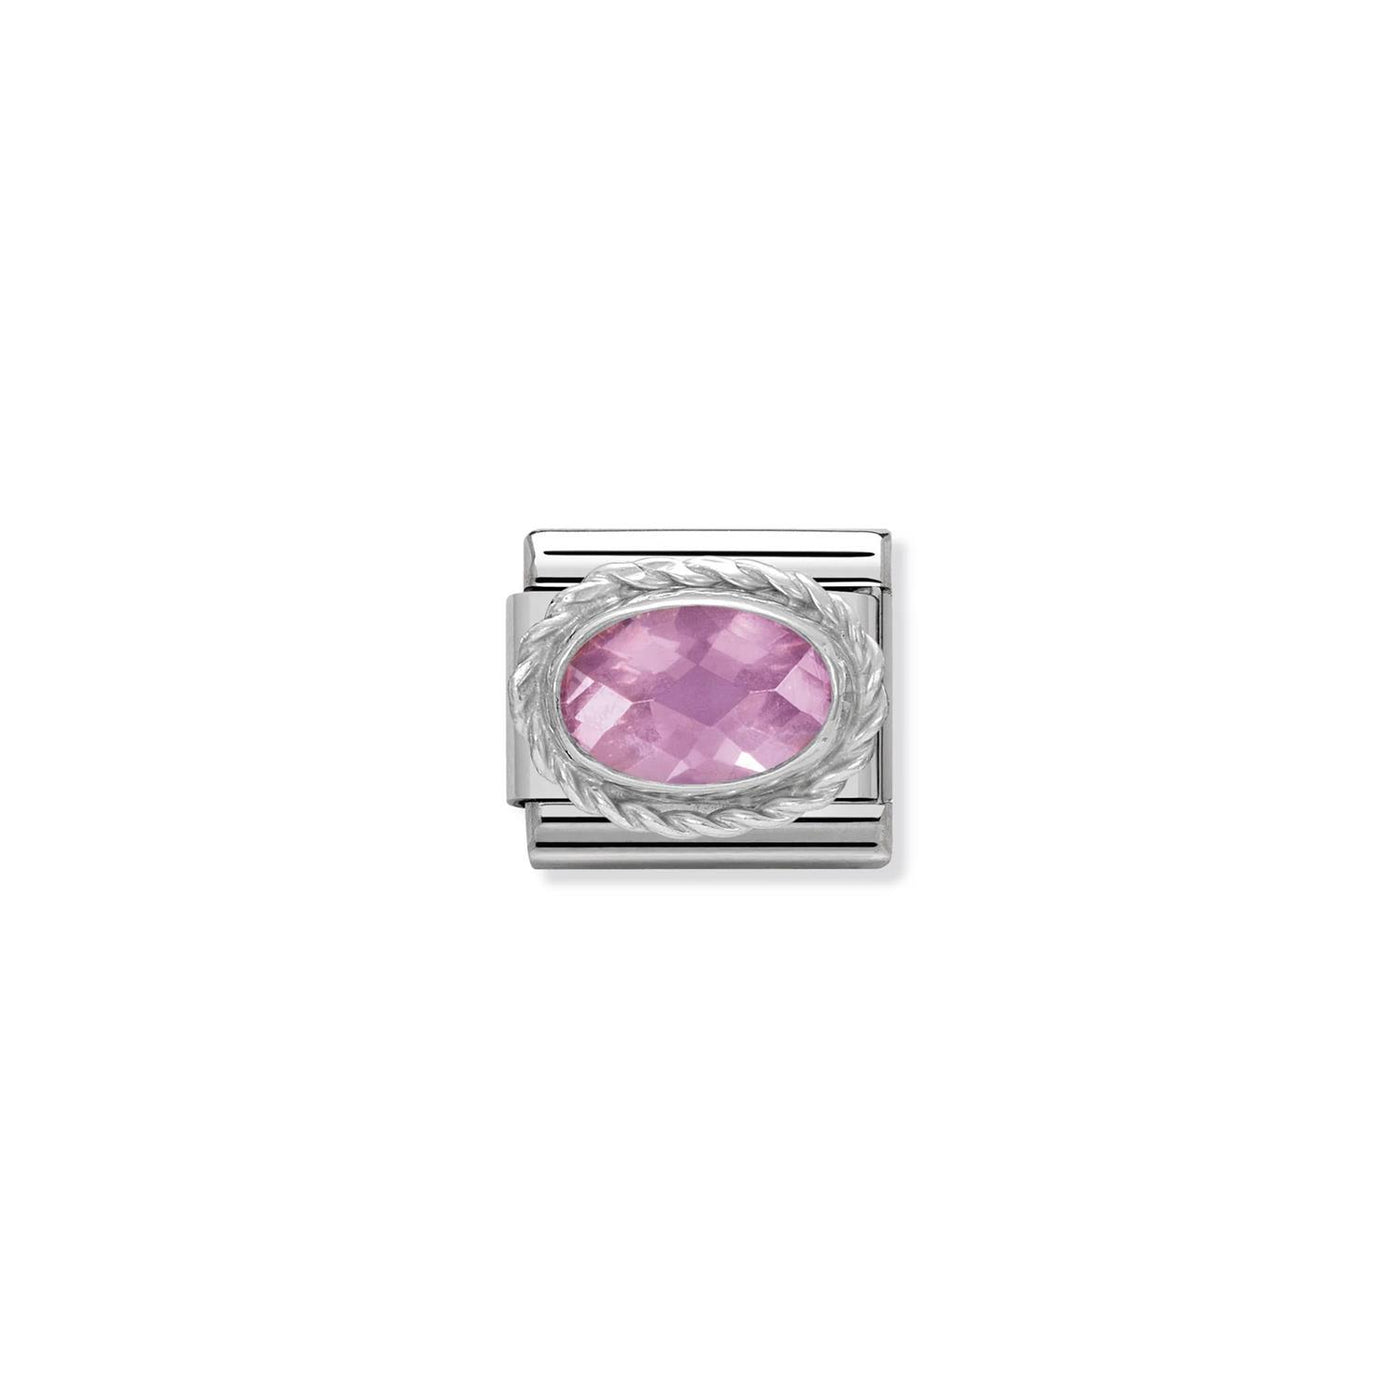 Faceted CZ 925 sterling silver setting and CZ Pink